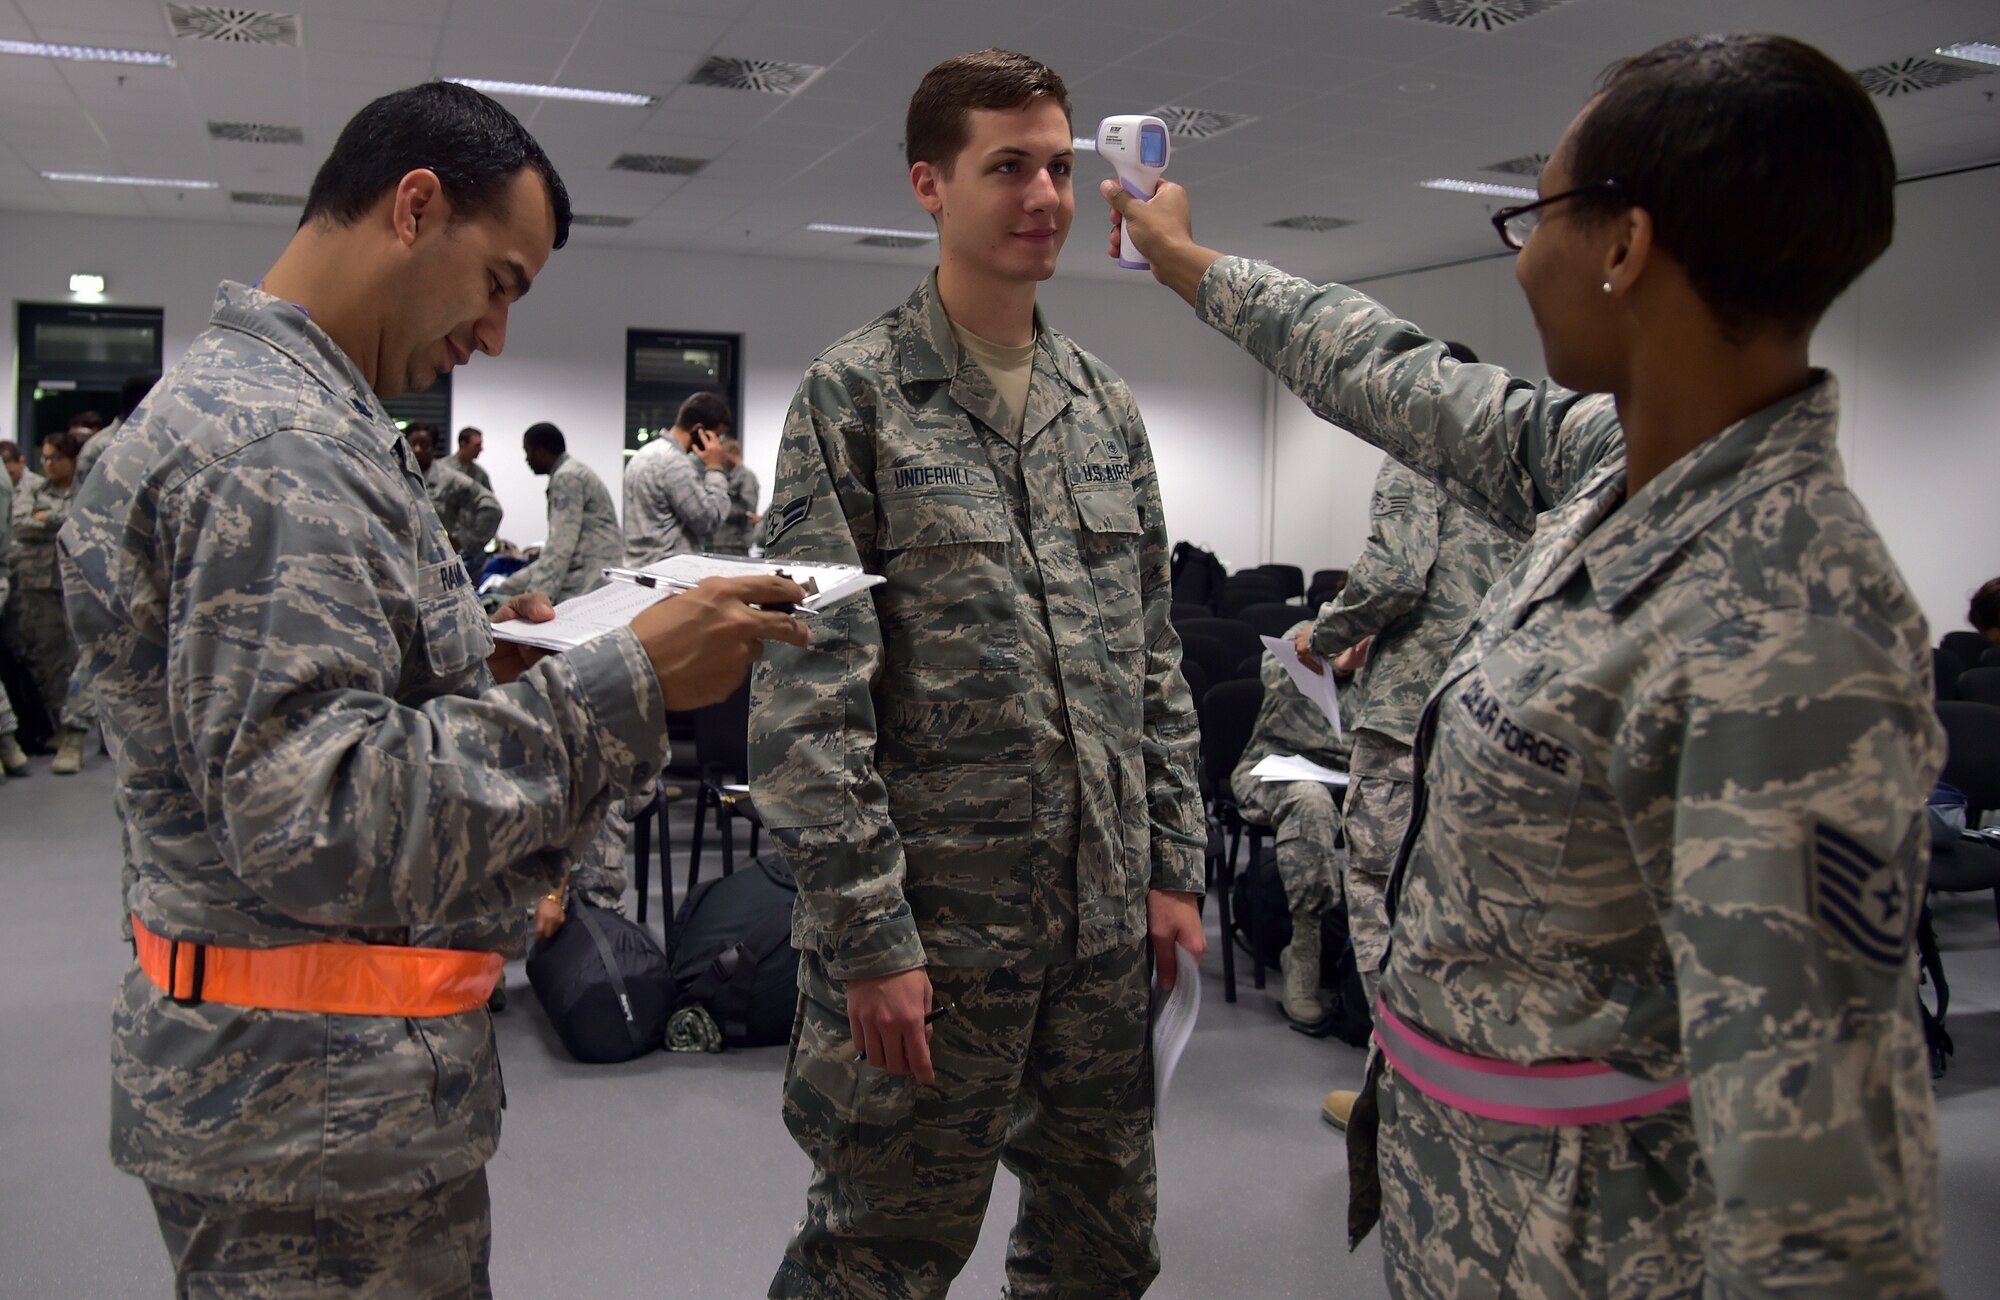 Airman 1st Class Mark Underhill (middle), 633rd Medical Group medical technician has his temperature taken by Tech. Sgt. Saquadrea Crosby(right), 86th AMDS public health NCOIC as Lt. Col. Juan Ramirez (left), 86th Aerospace Medicine Squadron public health flight commander, logs the information at a passenger holding facility at Ramstein Air Base, Germany, Oct. 19, 2014. Any personnel traveling into Ramstein from Ebola infected areas will be medically screened upon their arrival and cleared by public health for onward travel to ensure the health and safety of all passengers, aircrew and members of the Kaiserslautern community. (U.S. Air Force photo/Staff Sgt. Sara Keller)